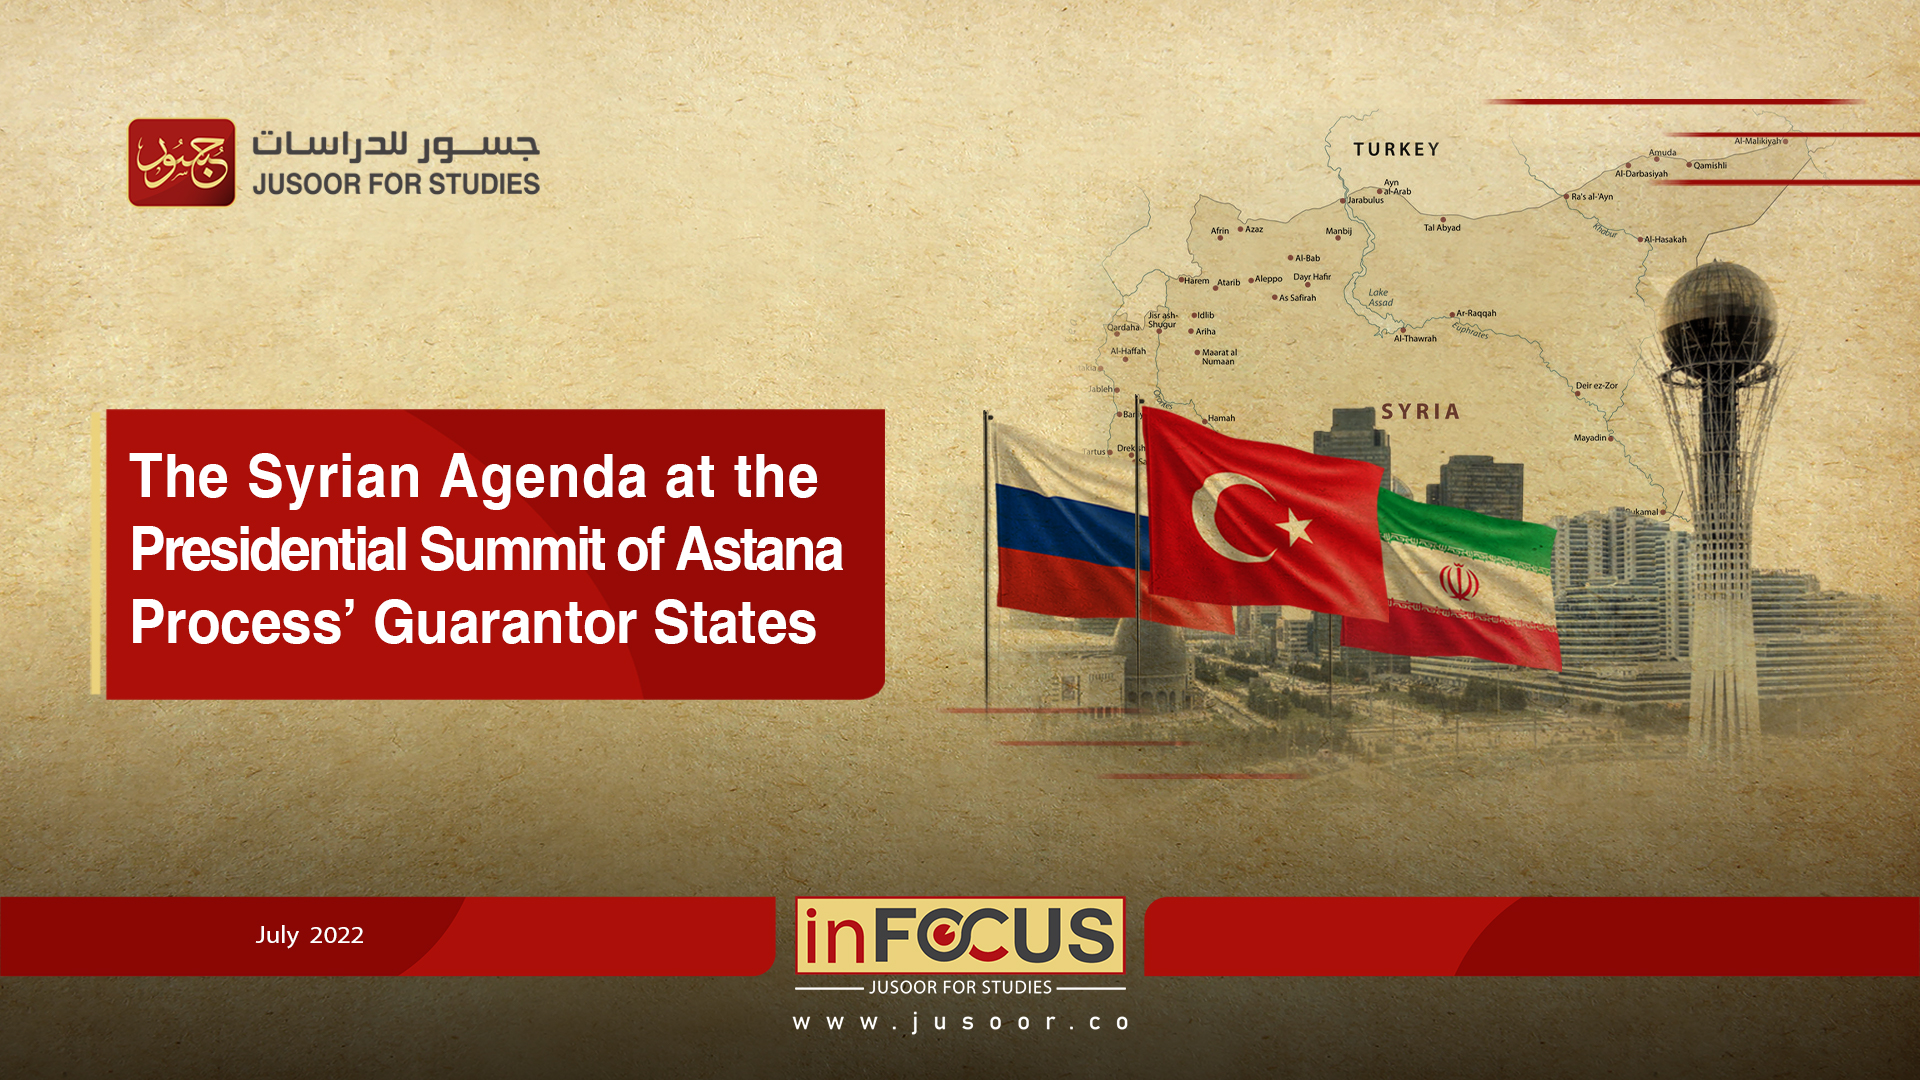 The Syrian Agenda at the Presidential Summit of Astana Process’ Guarantor States 